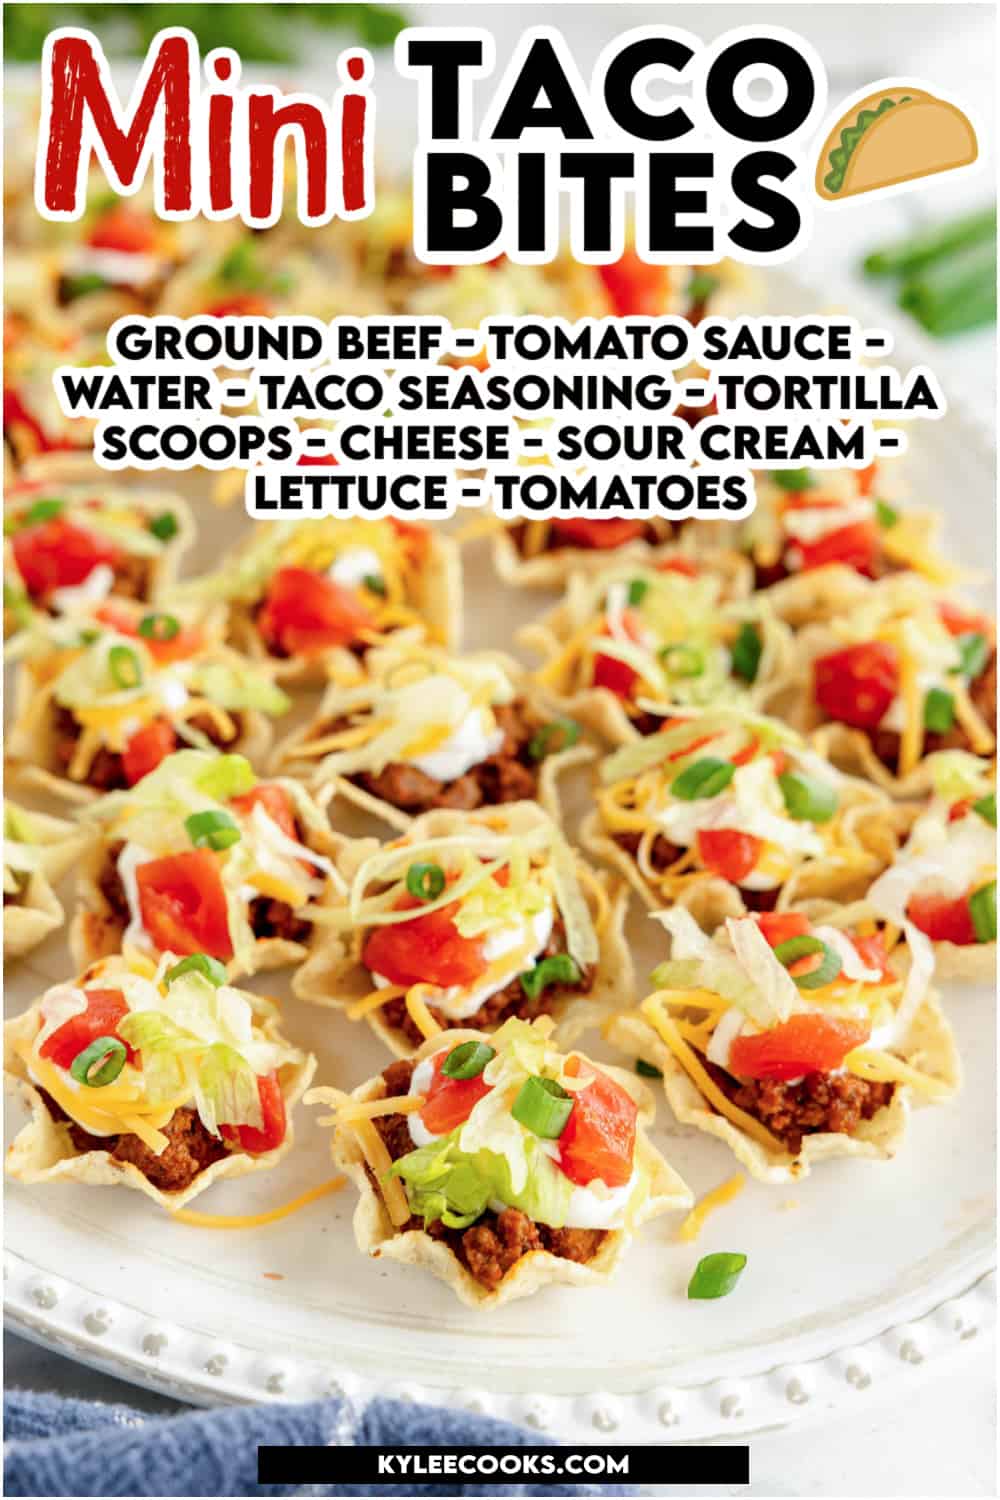 Taco bites on a white platter with recipe name and ingredients overlaid in text..